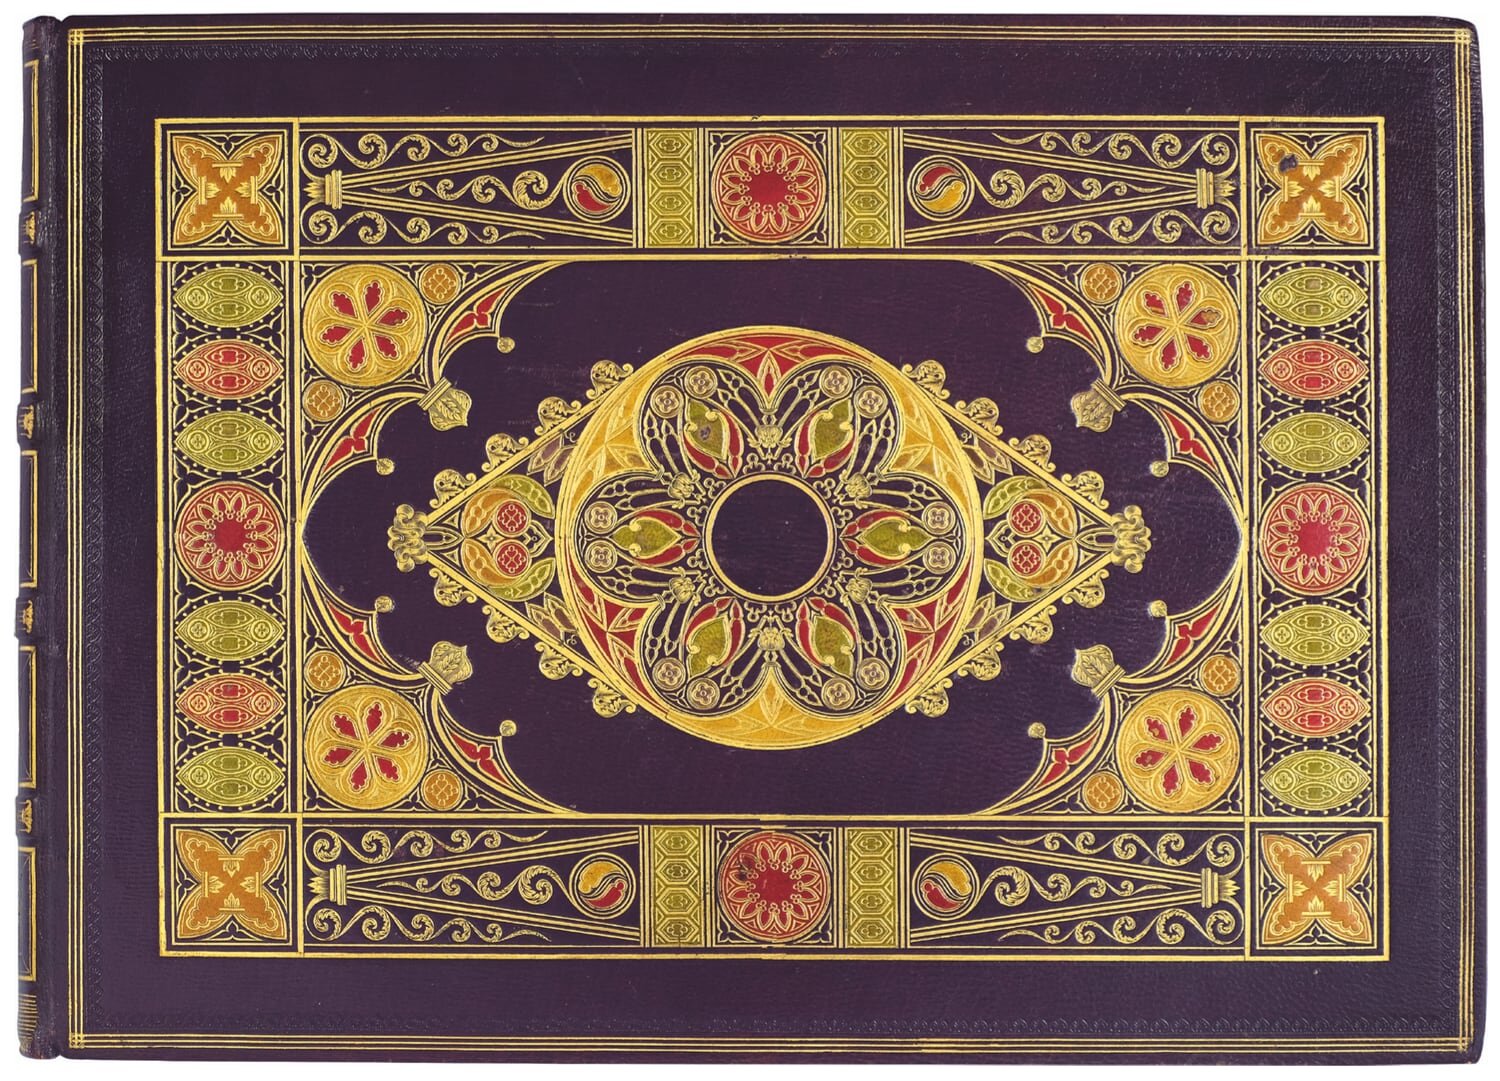  Two experiments in gothic ornamentation, by Pauline François [no. 153], and (probably) J. M. Kronheim [no. 560] 